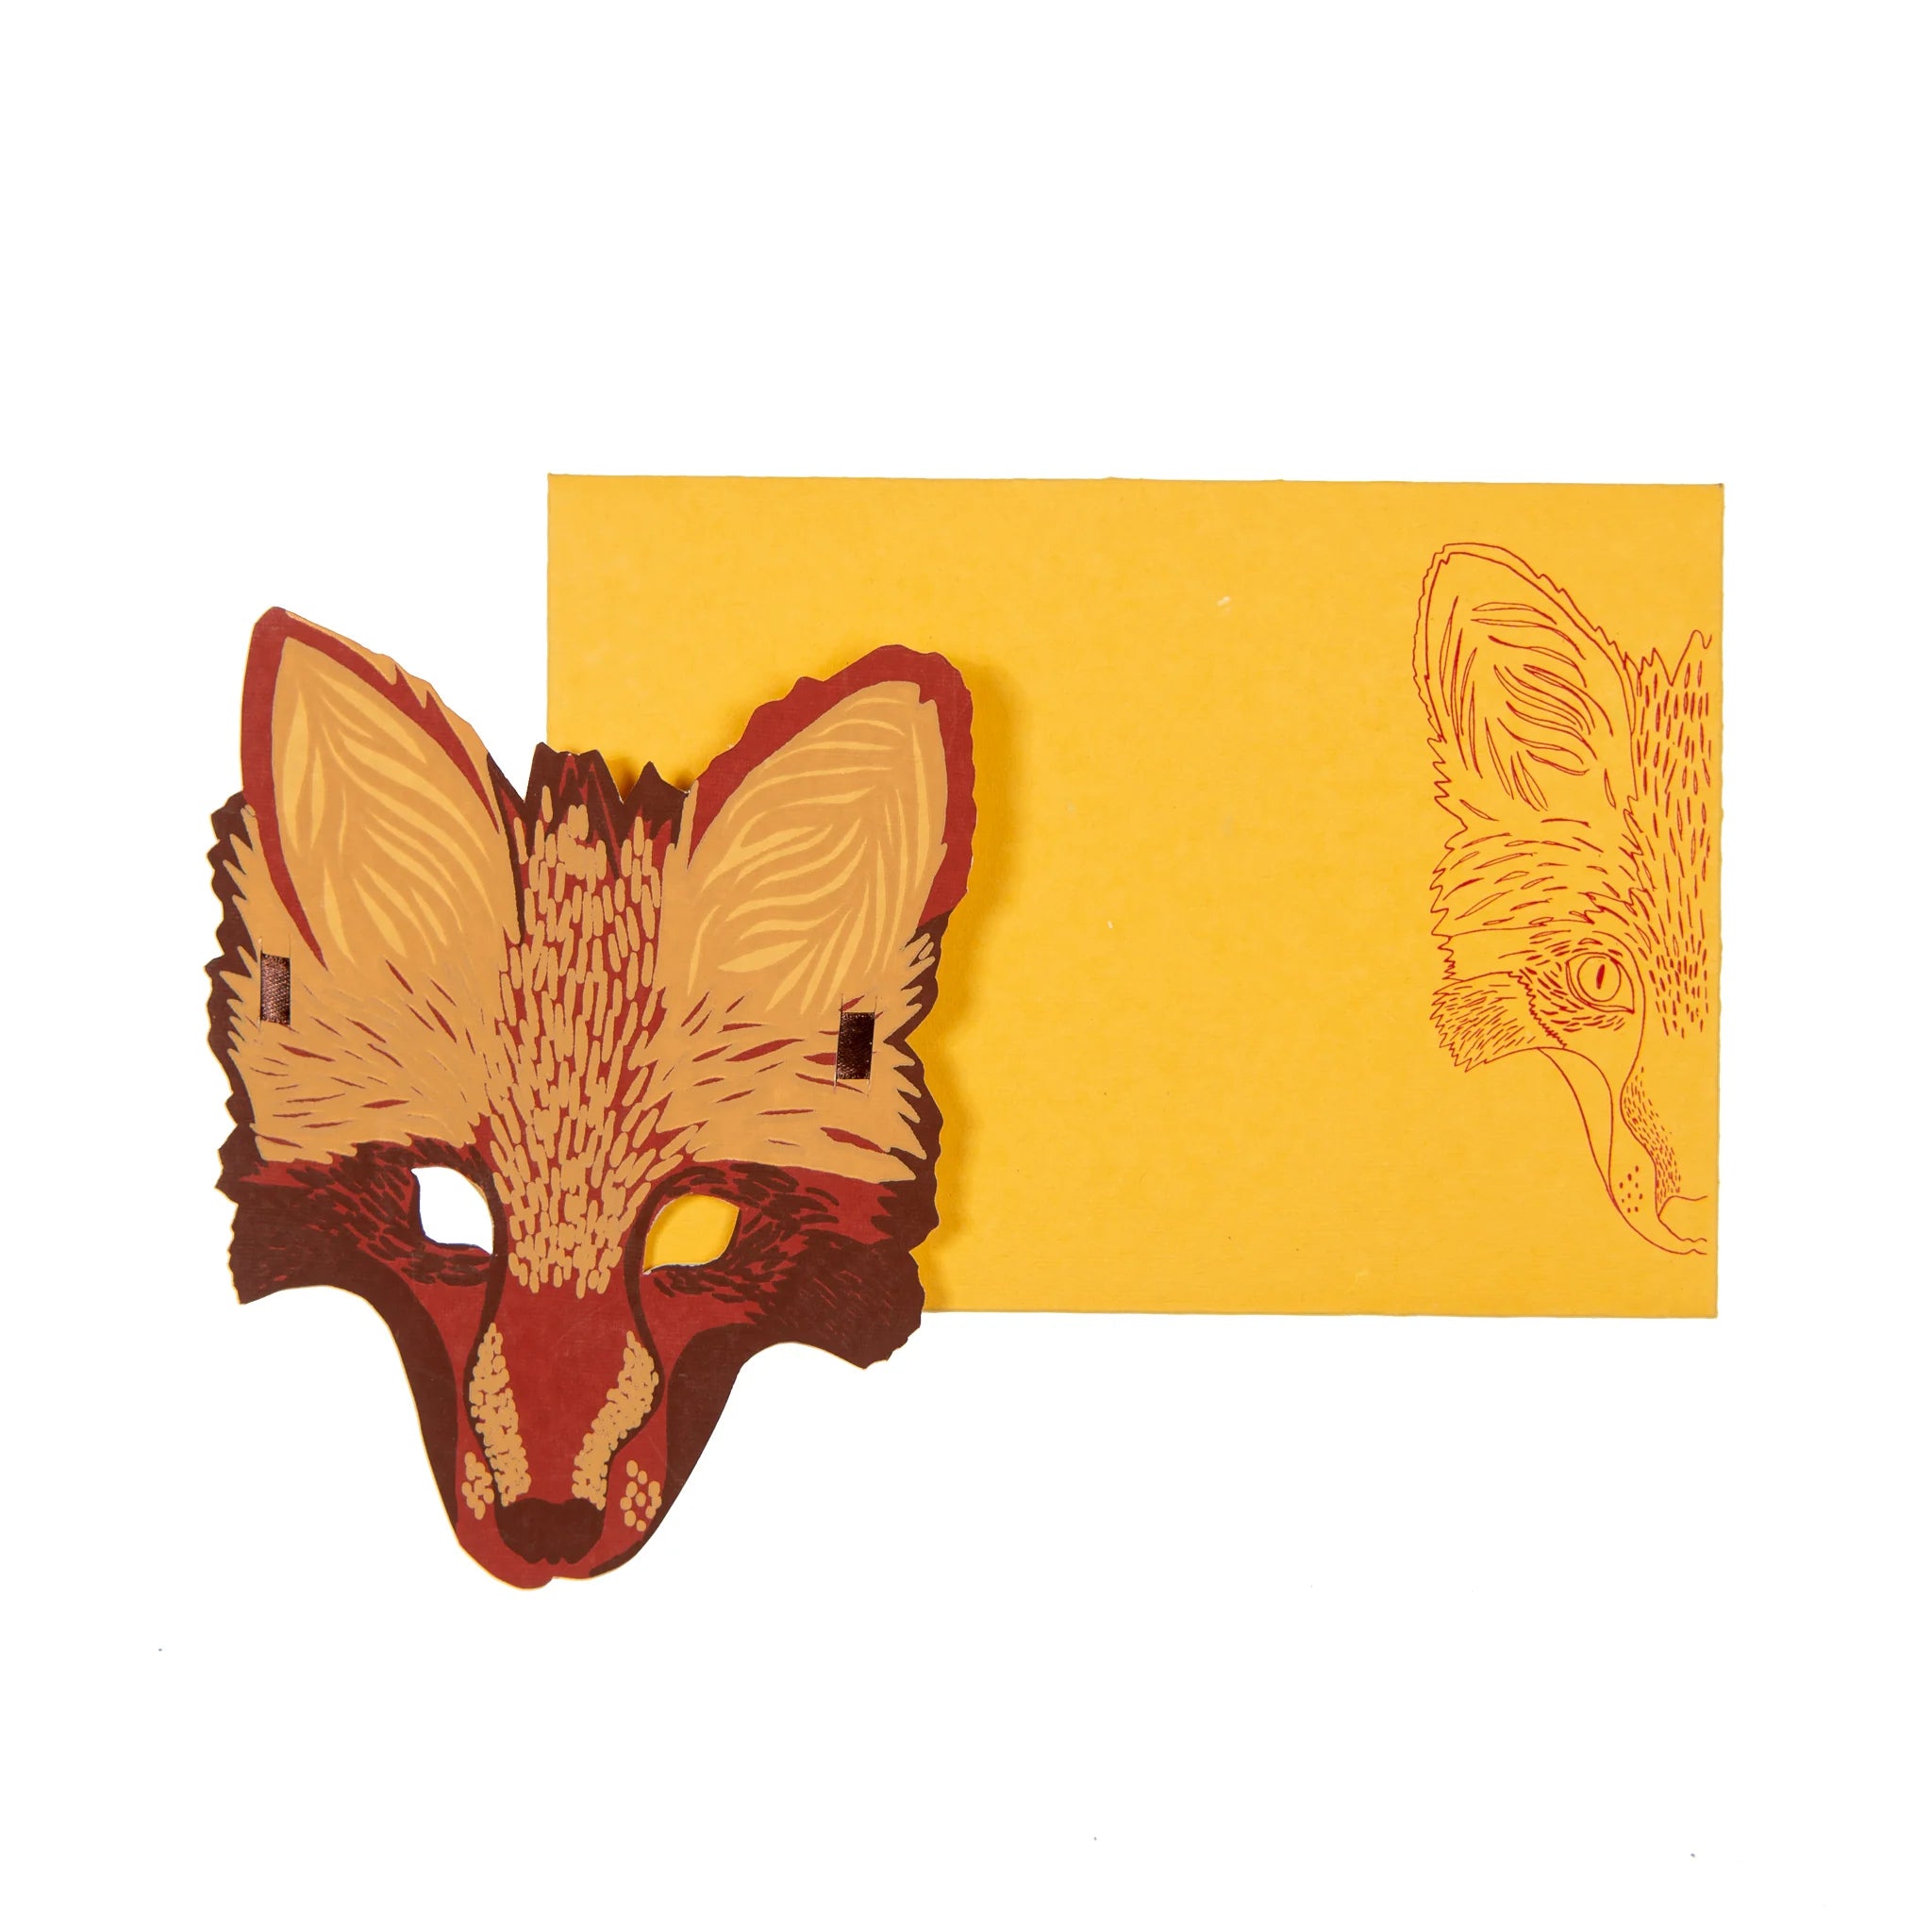 Hand printed greetings card, printed and cut in the shape of a fox's face. Above a yellow envelope with an illustration of a fox on it.